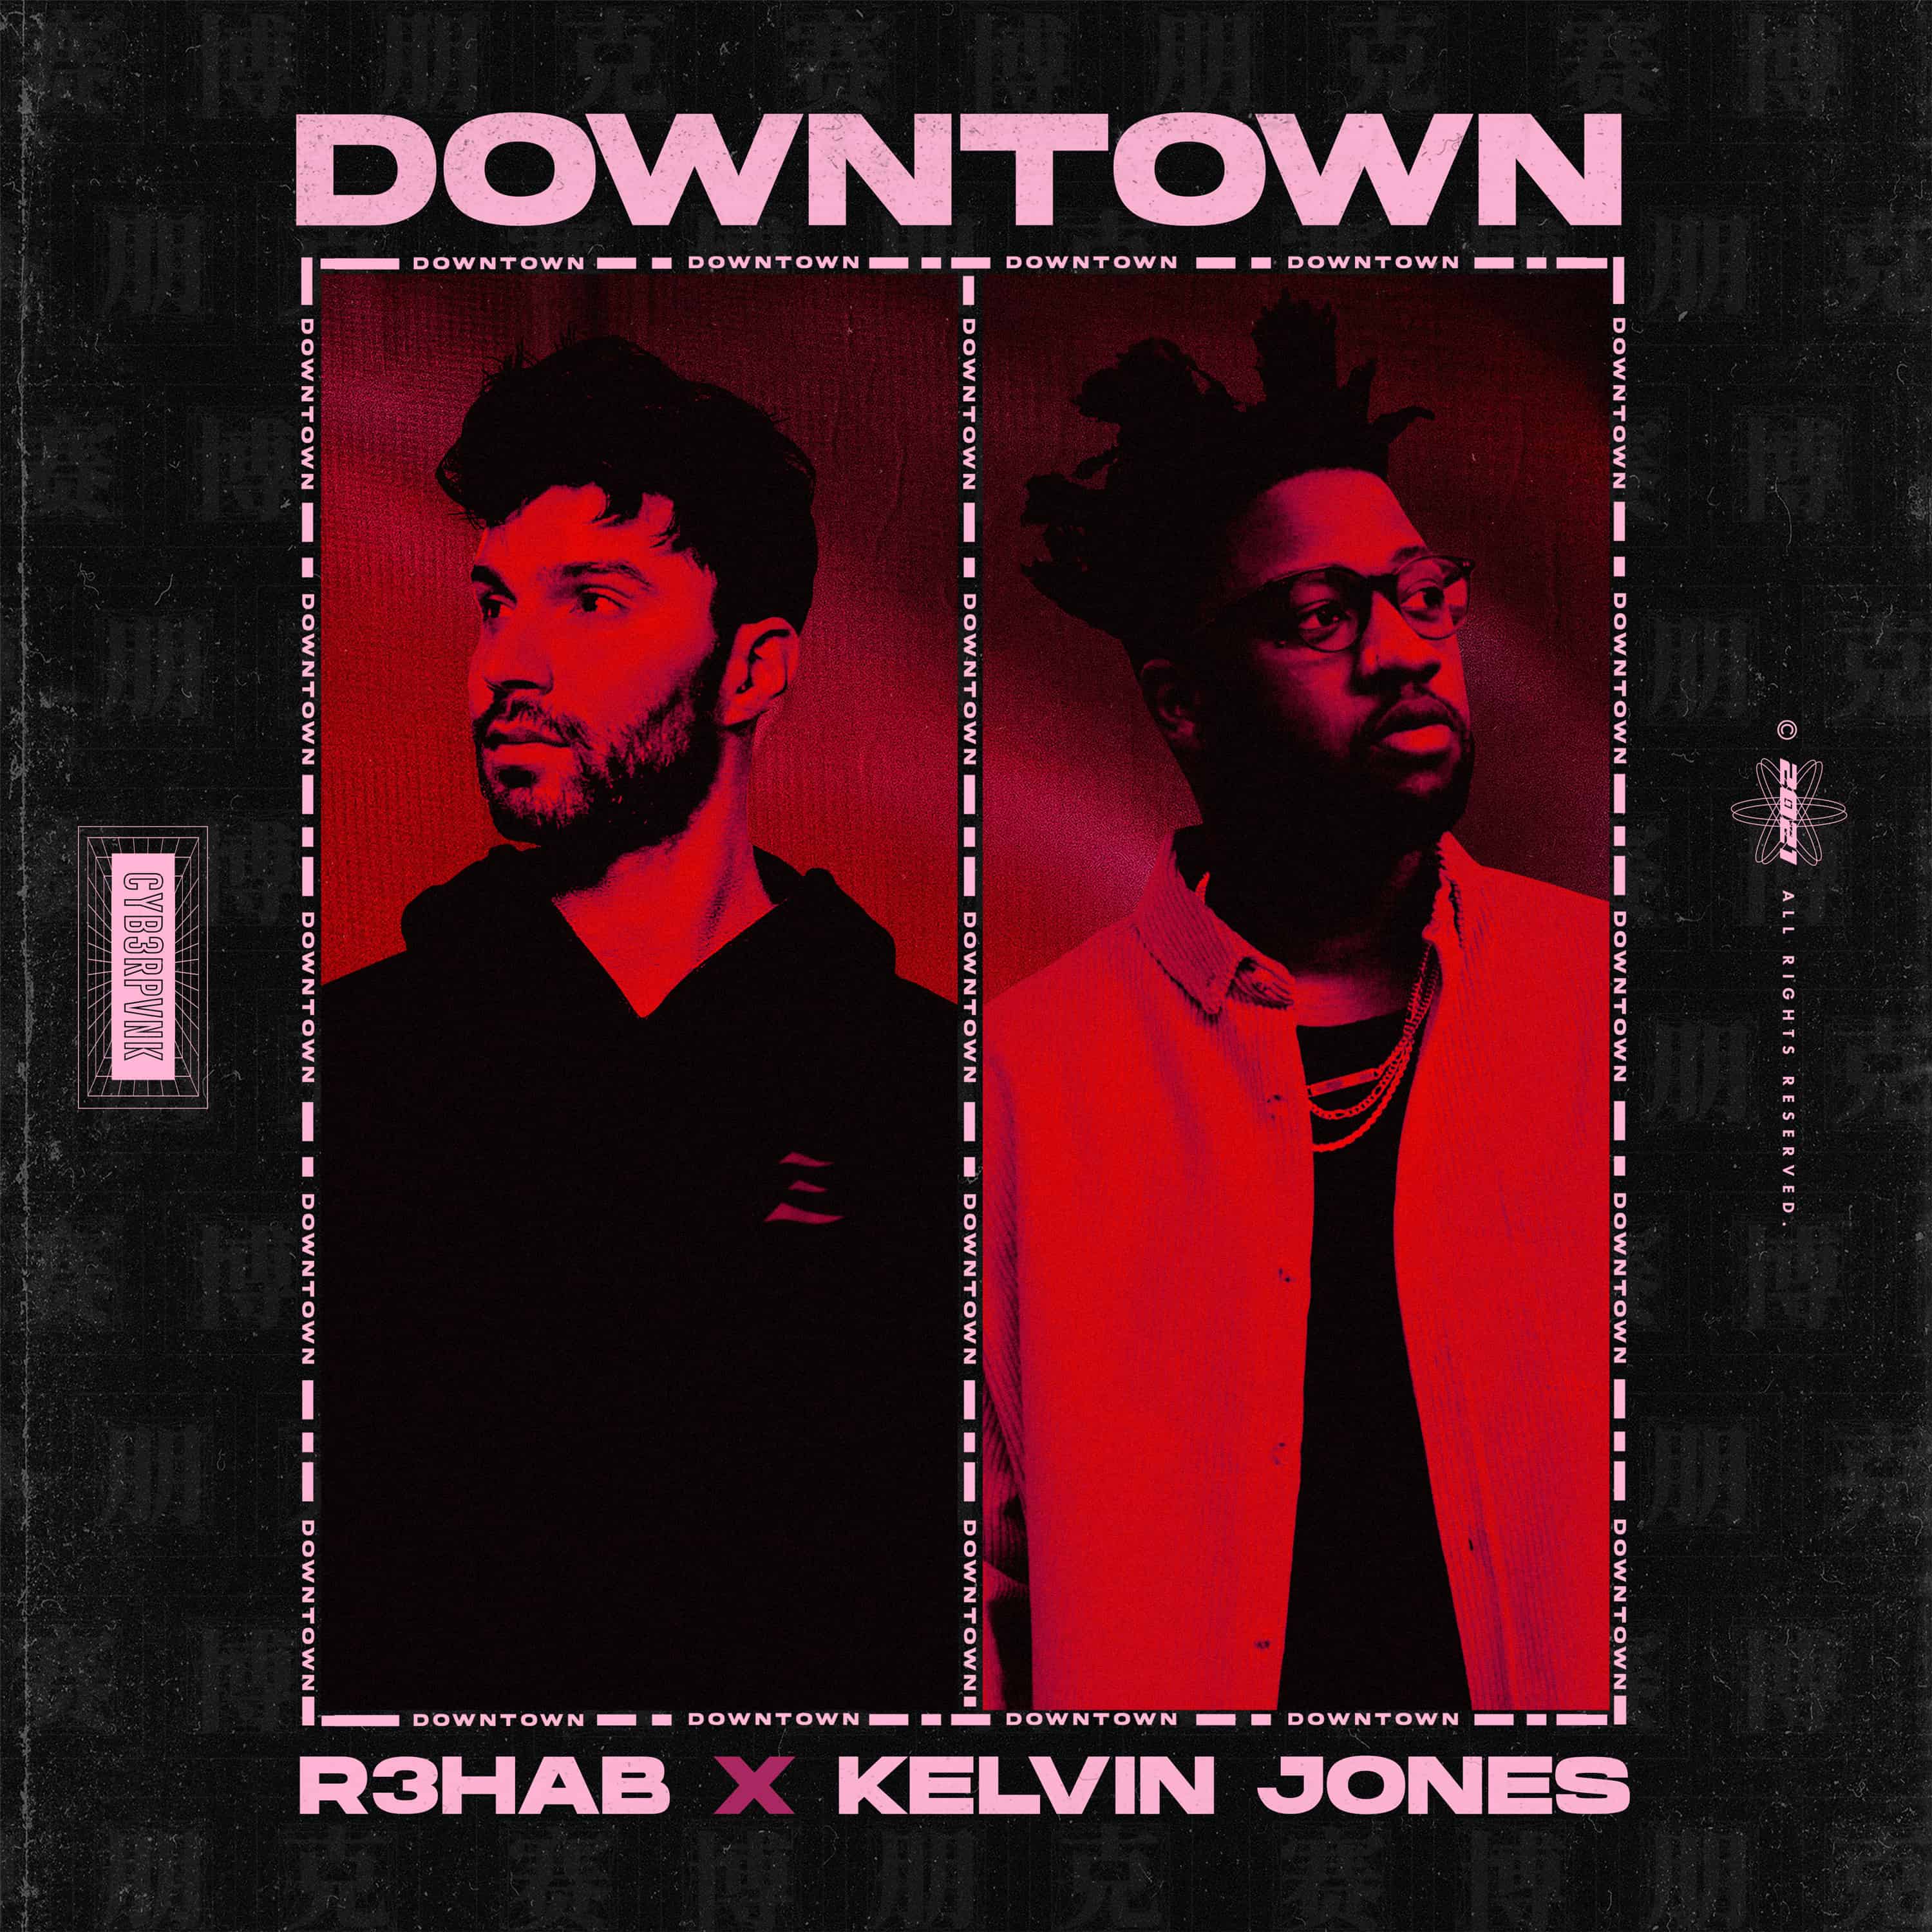 R3hab and Kelvin Jones’ new collab will have you dancing all over “Downtown:”